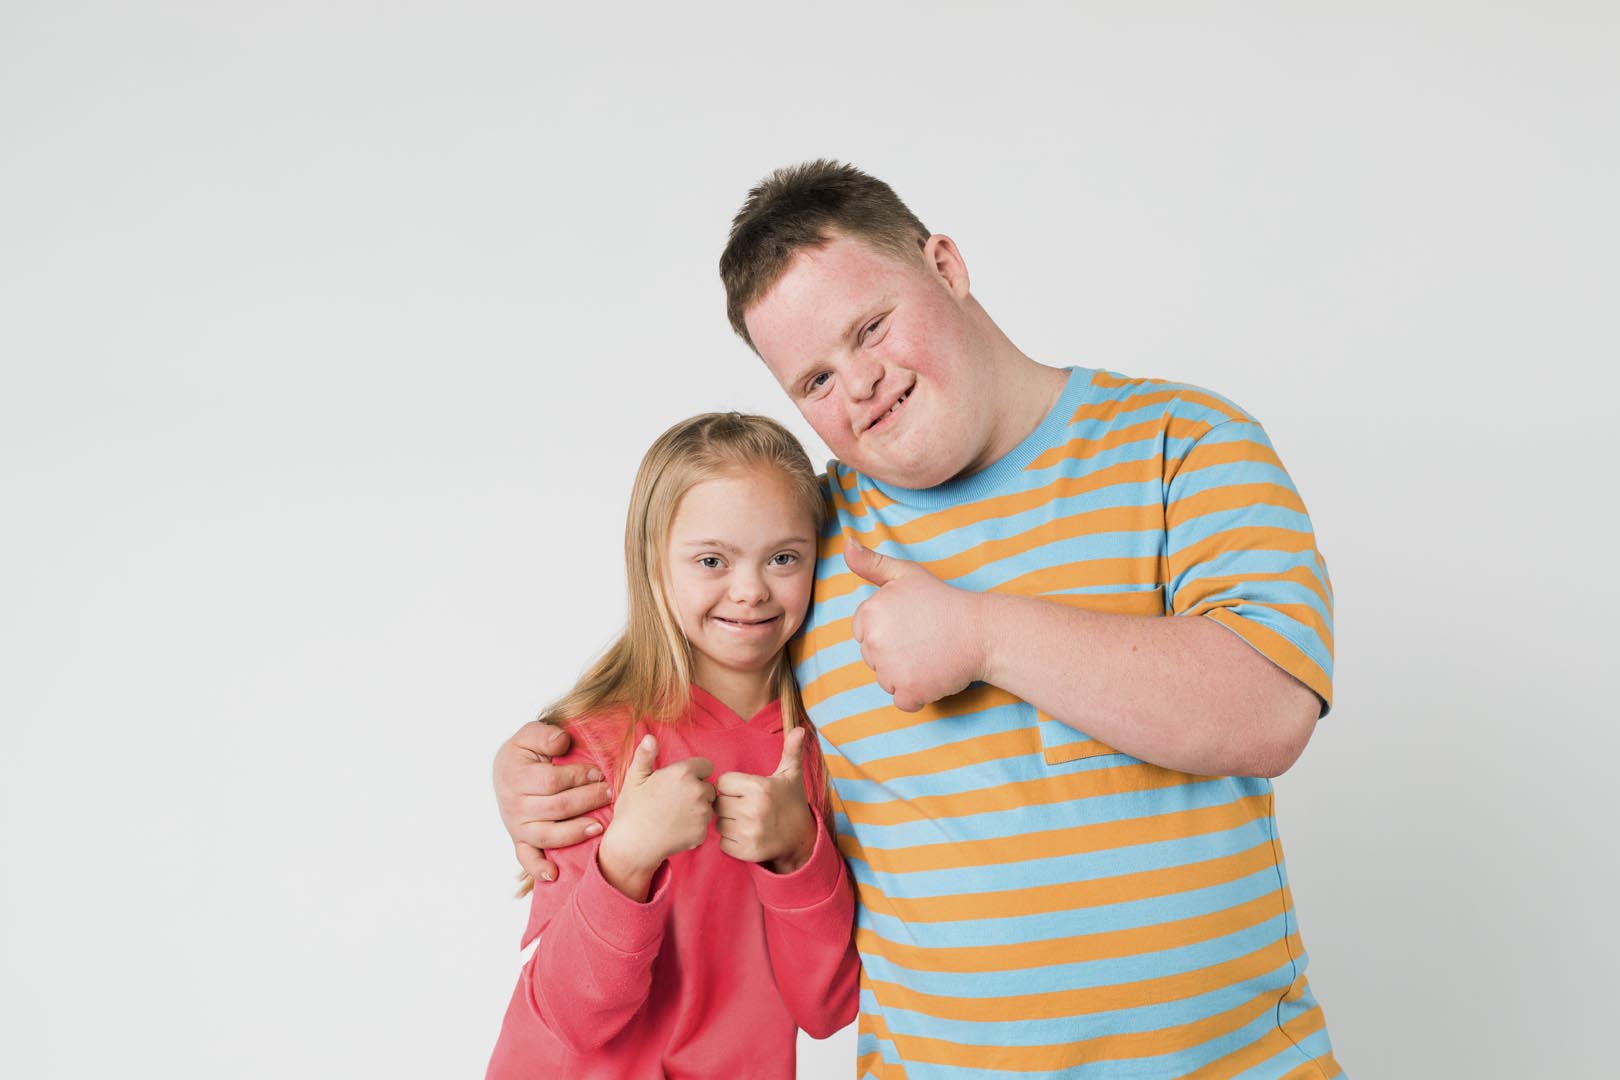 Facts about Down Syndrome